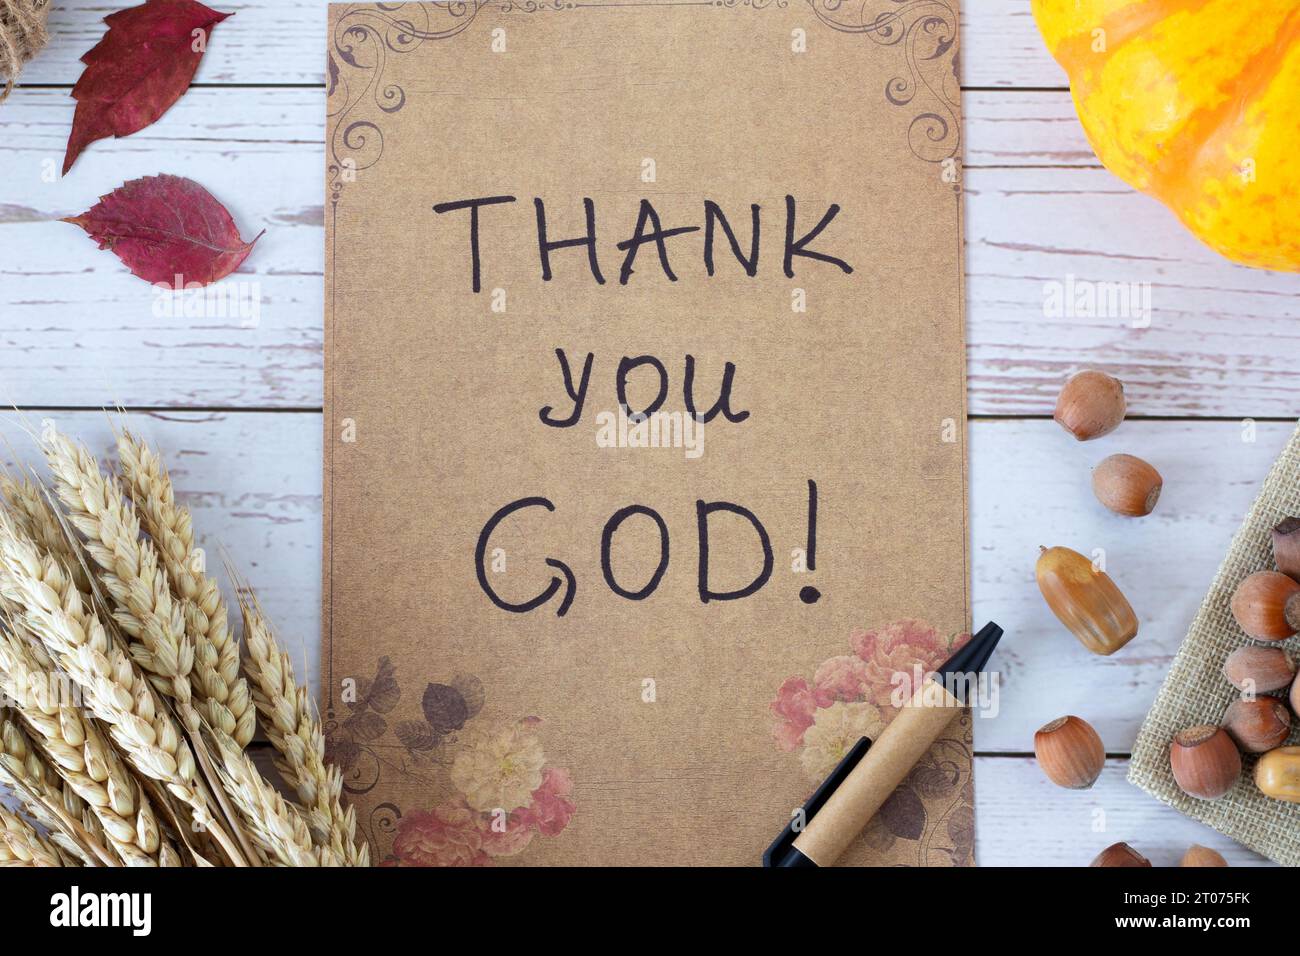 Thank You God, handwritten message on vintage paper with autumn leaves, pumpkin, and wheat on wood. Top view. Christian thanksgiving to Jesus Christ. Stock Photo